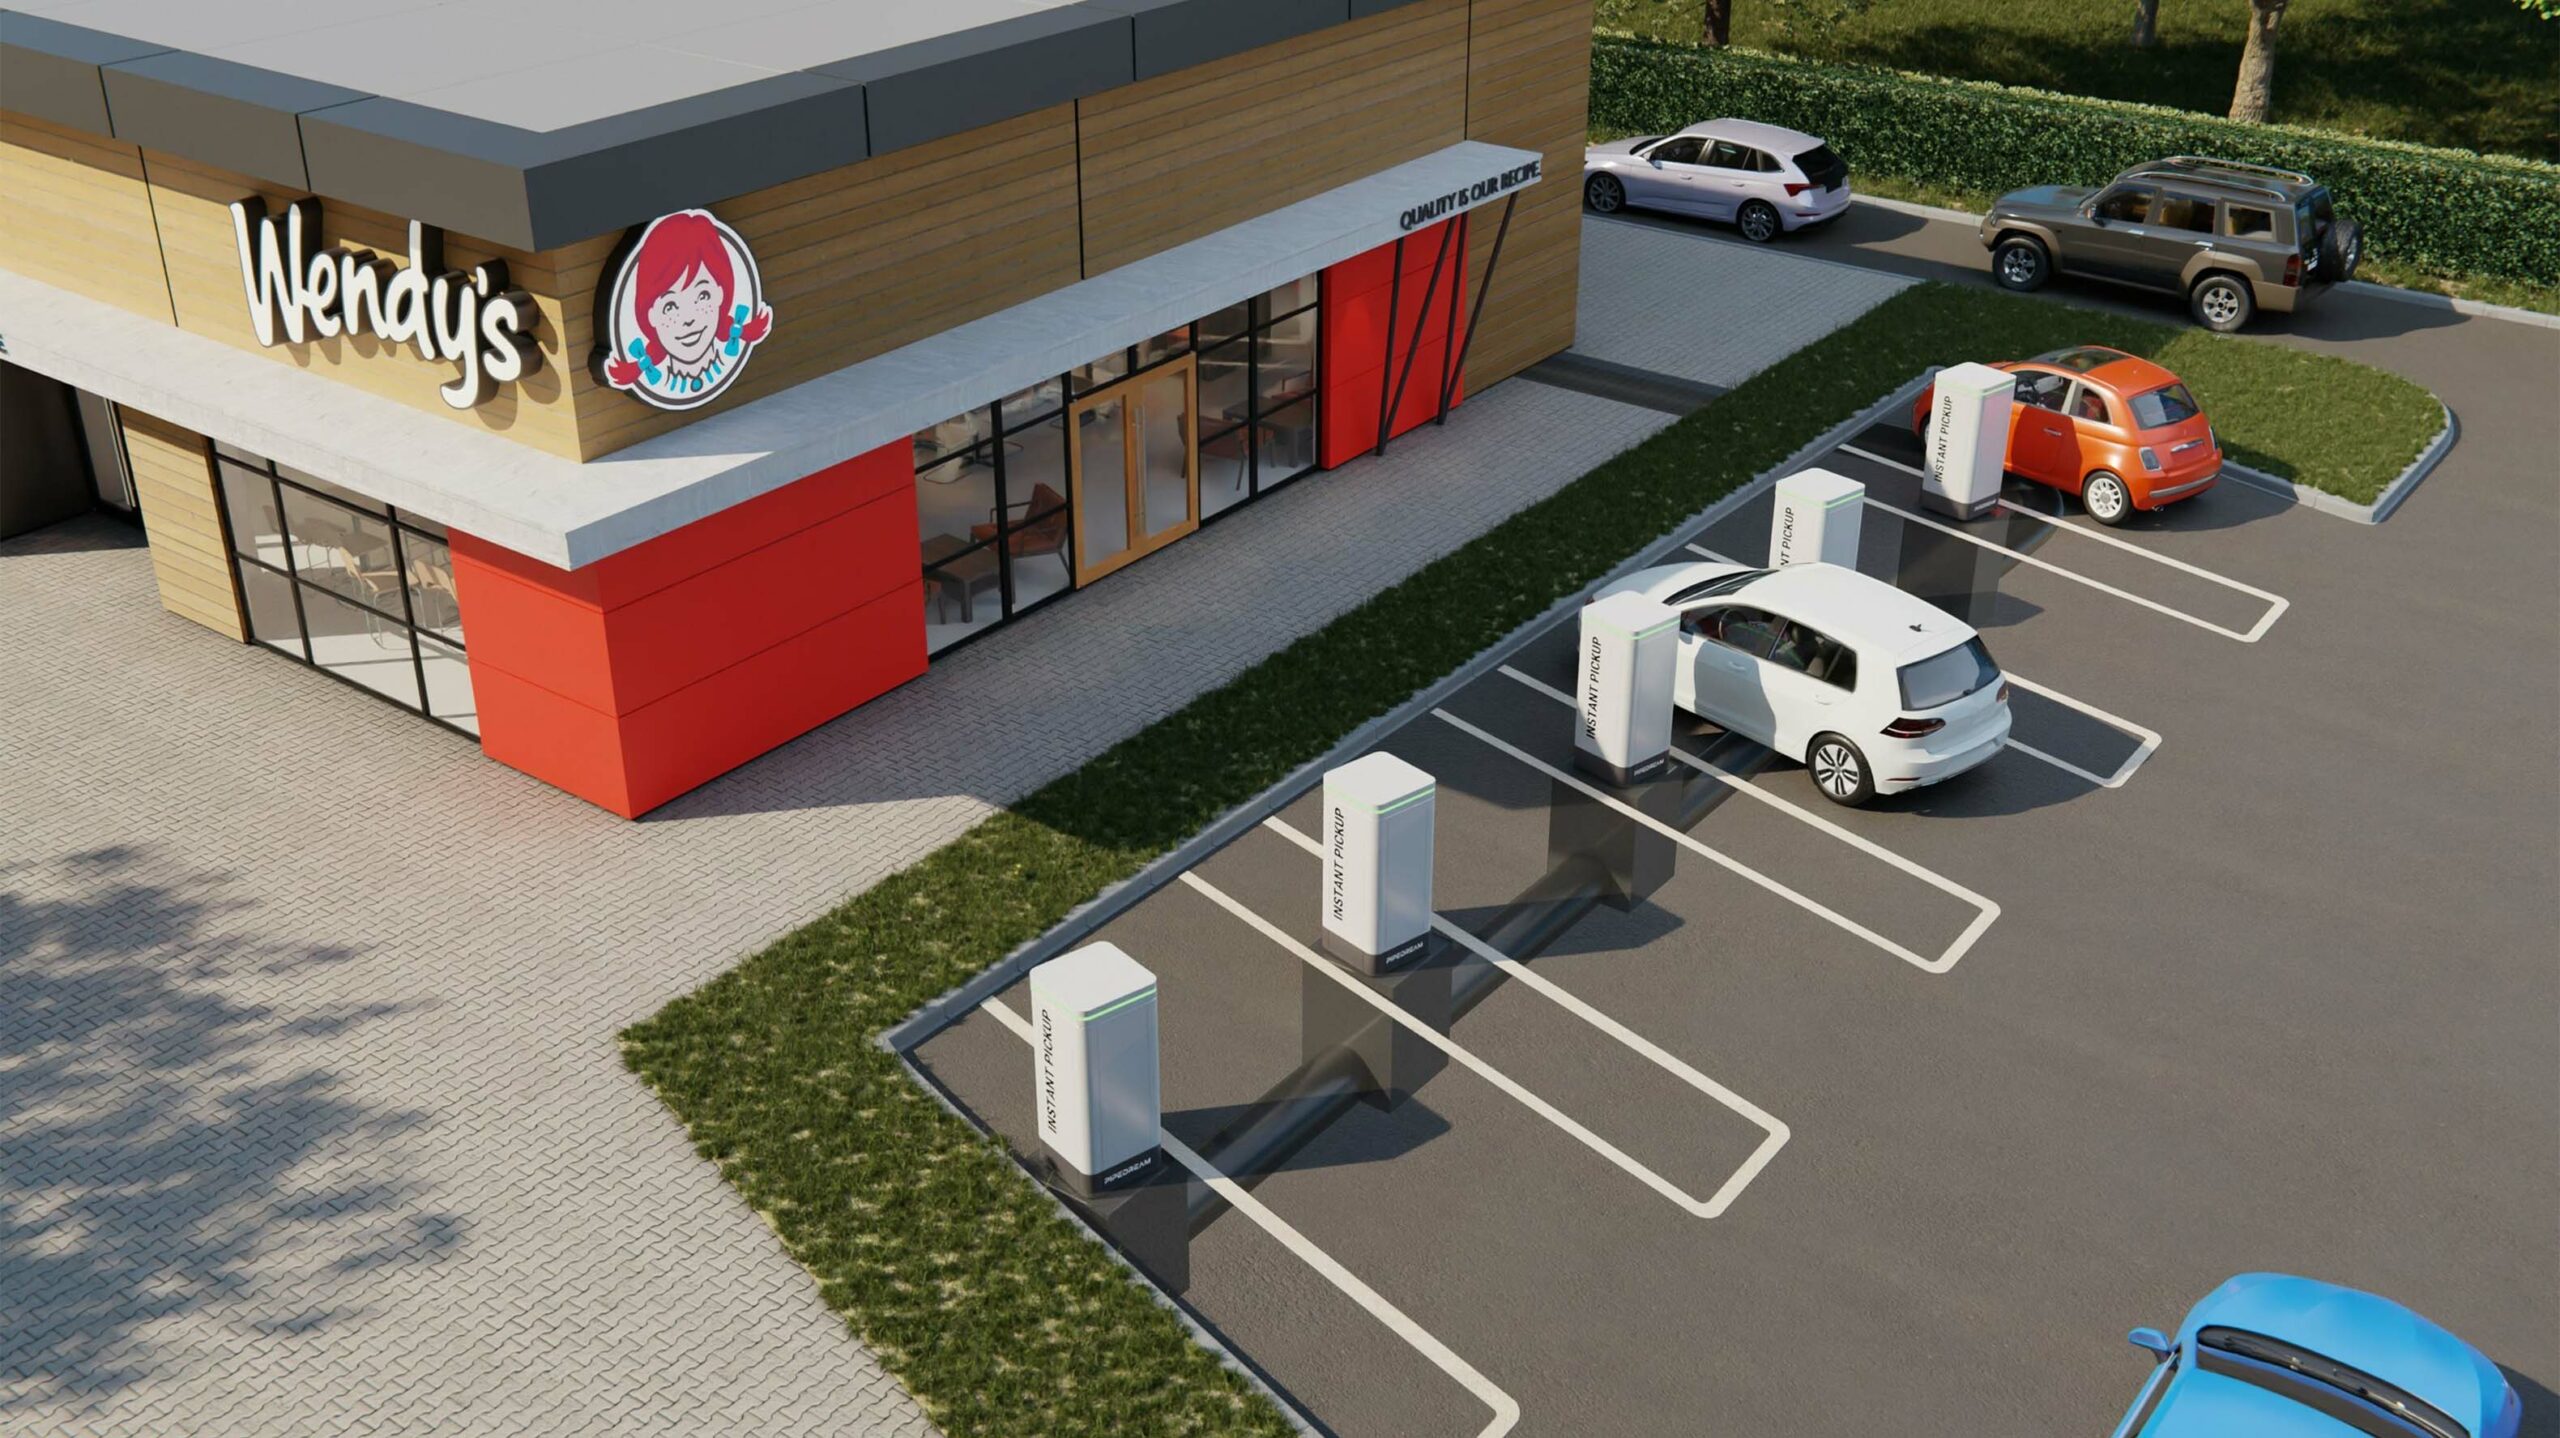 AI taking orders and robots in tunnels delivering them: the future of Wendy’s